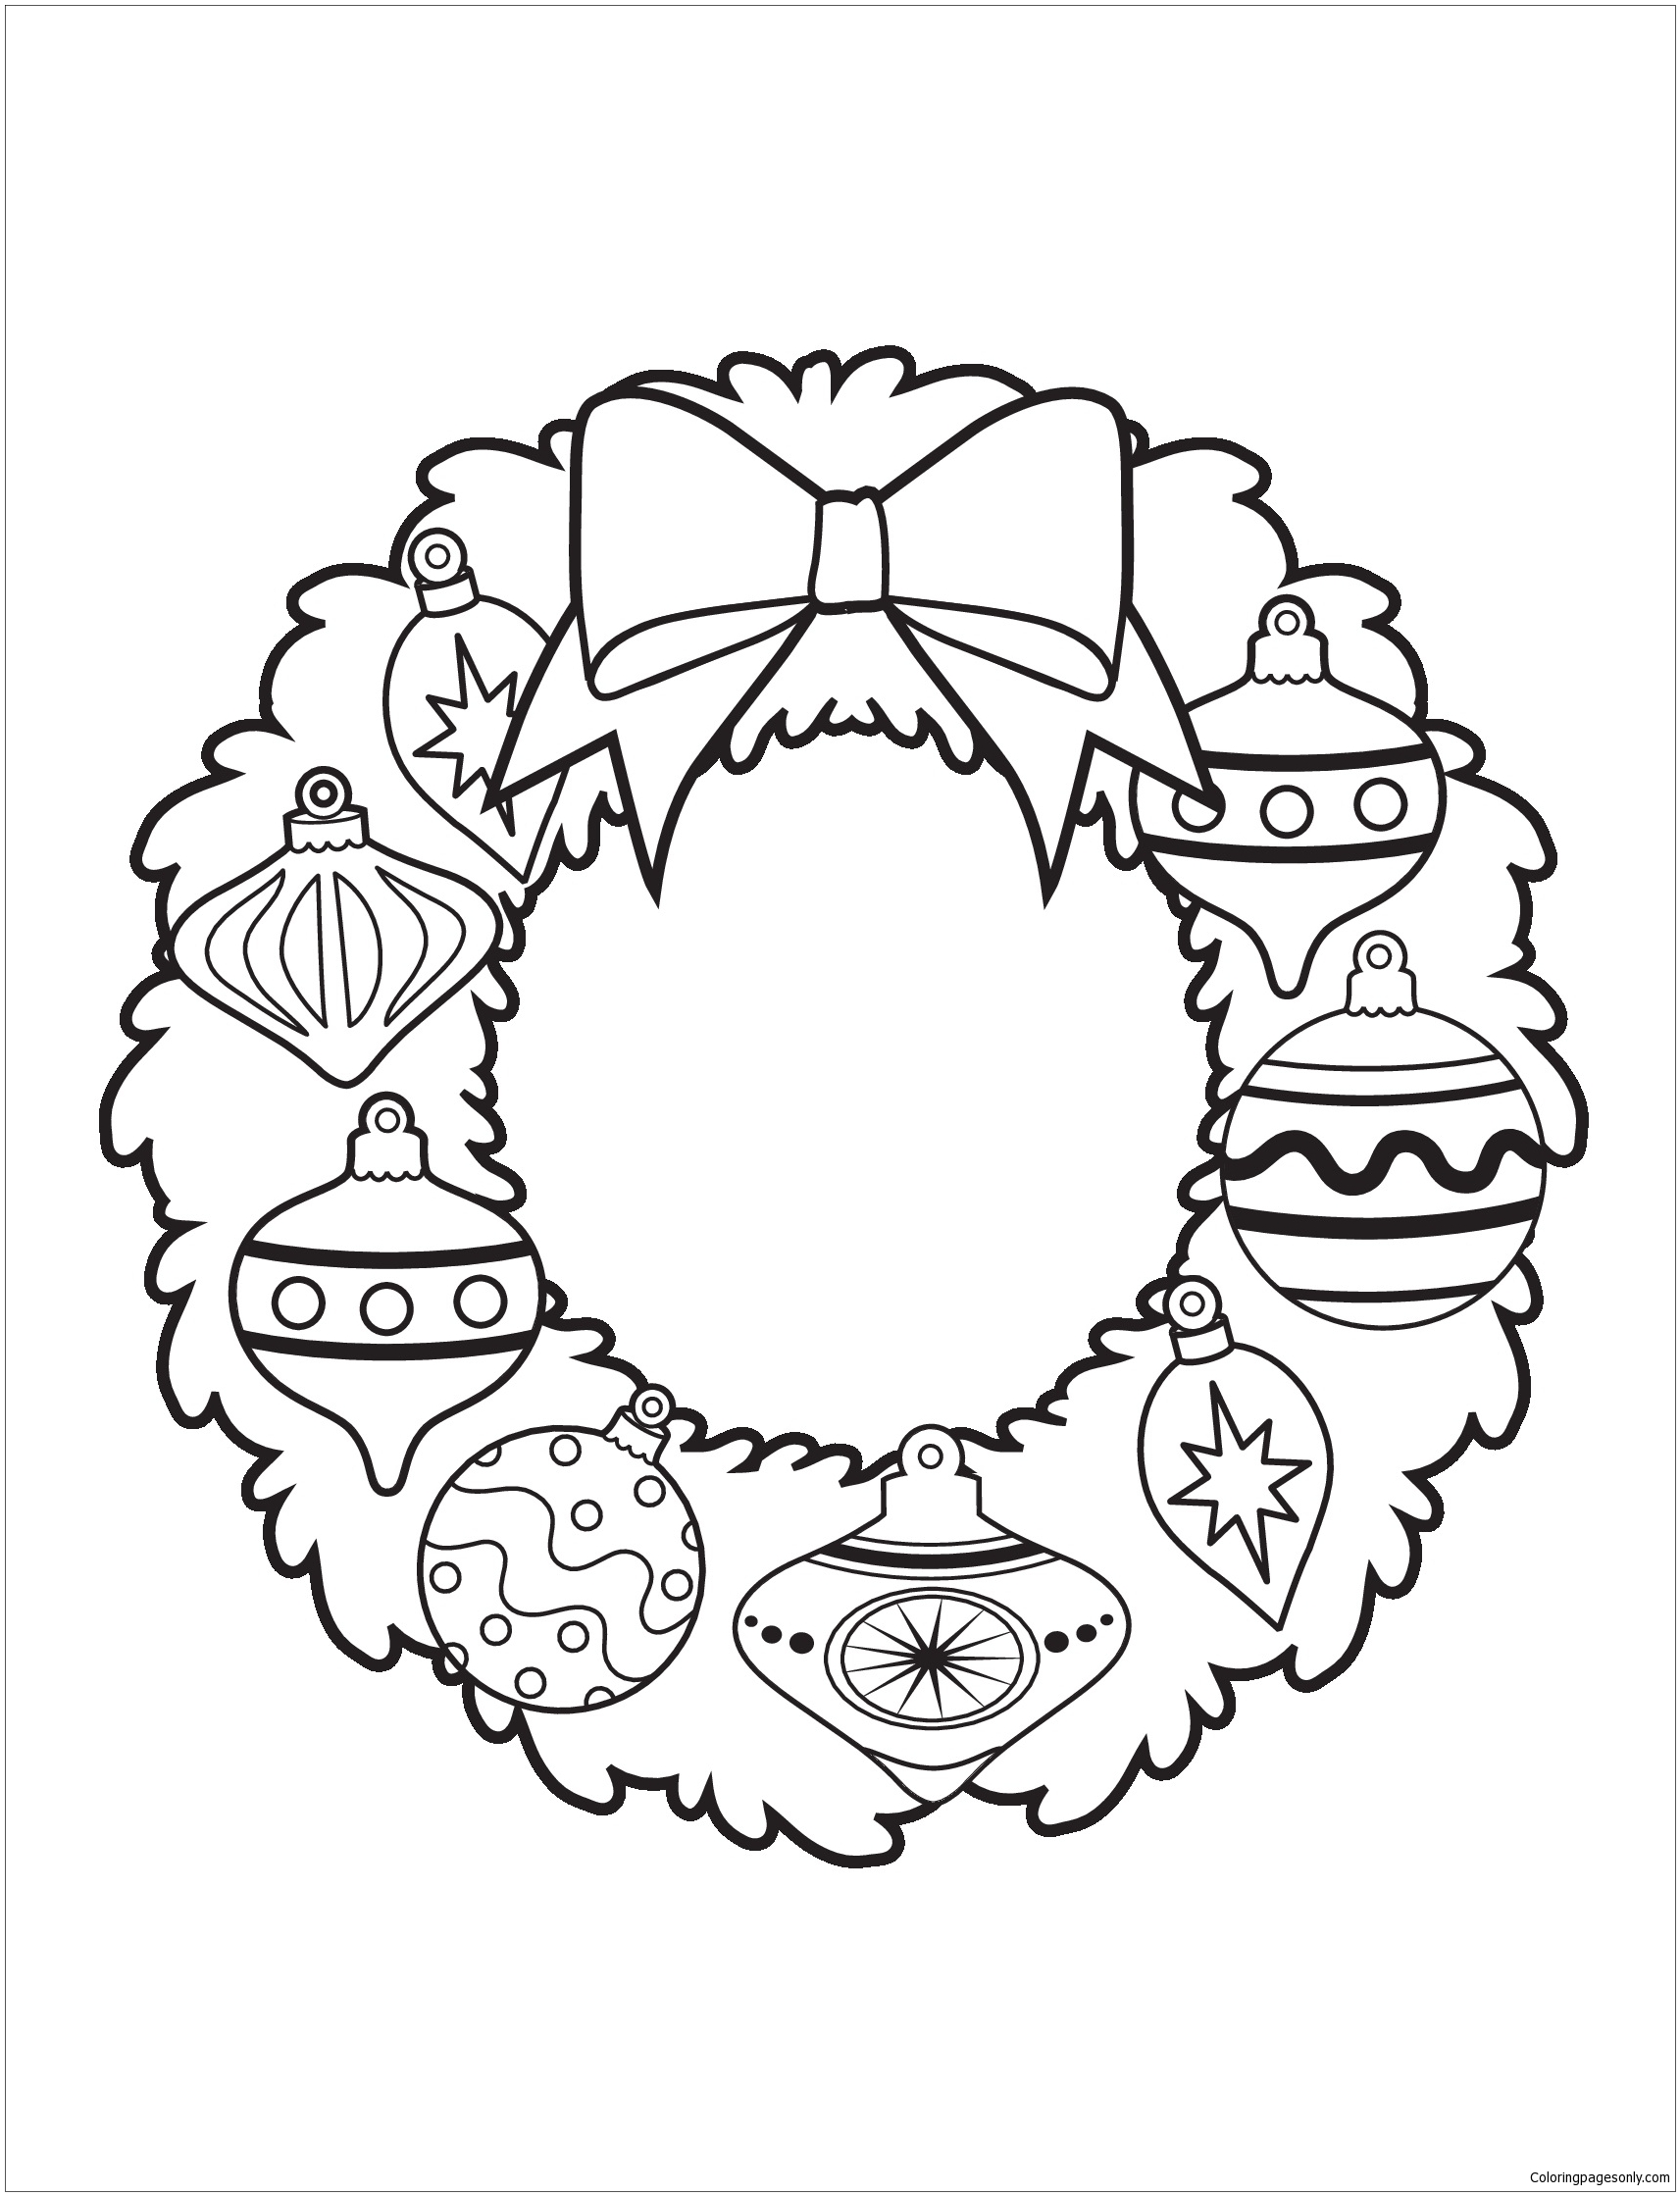 Download Ornament Wreath Christmas Coloring Pages - Holidays Coloring Pages - Free Printable Coloring ...